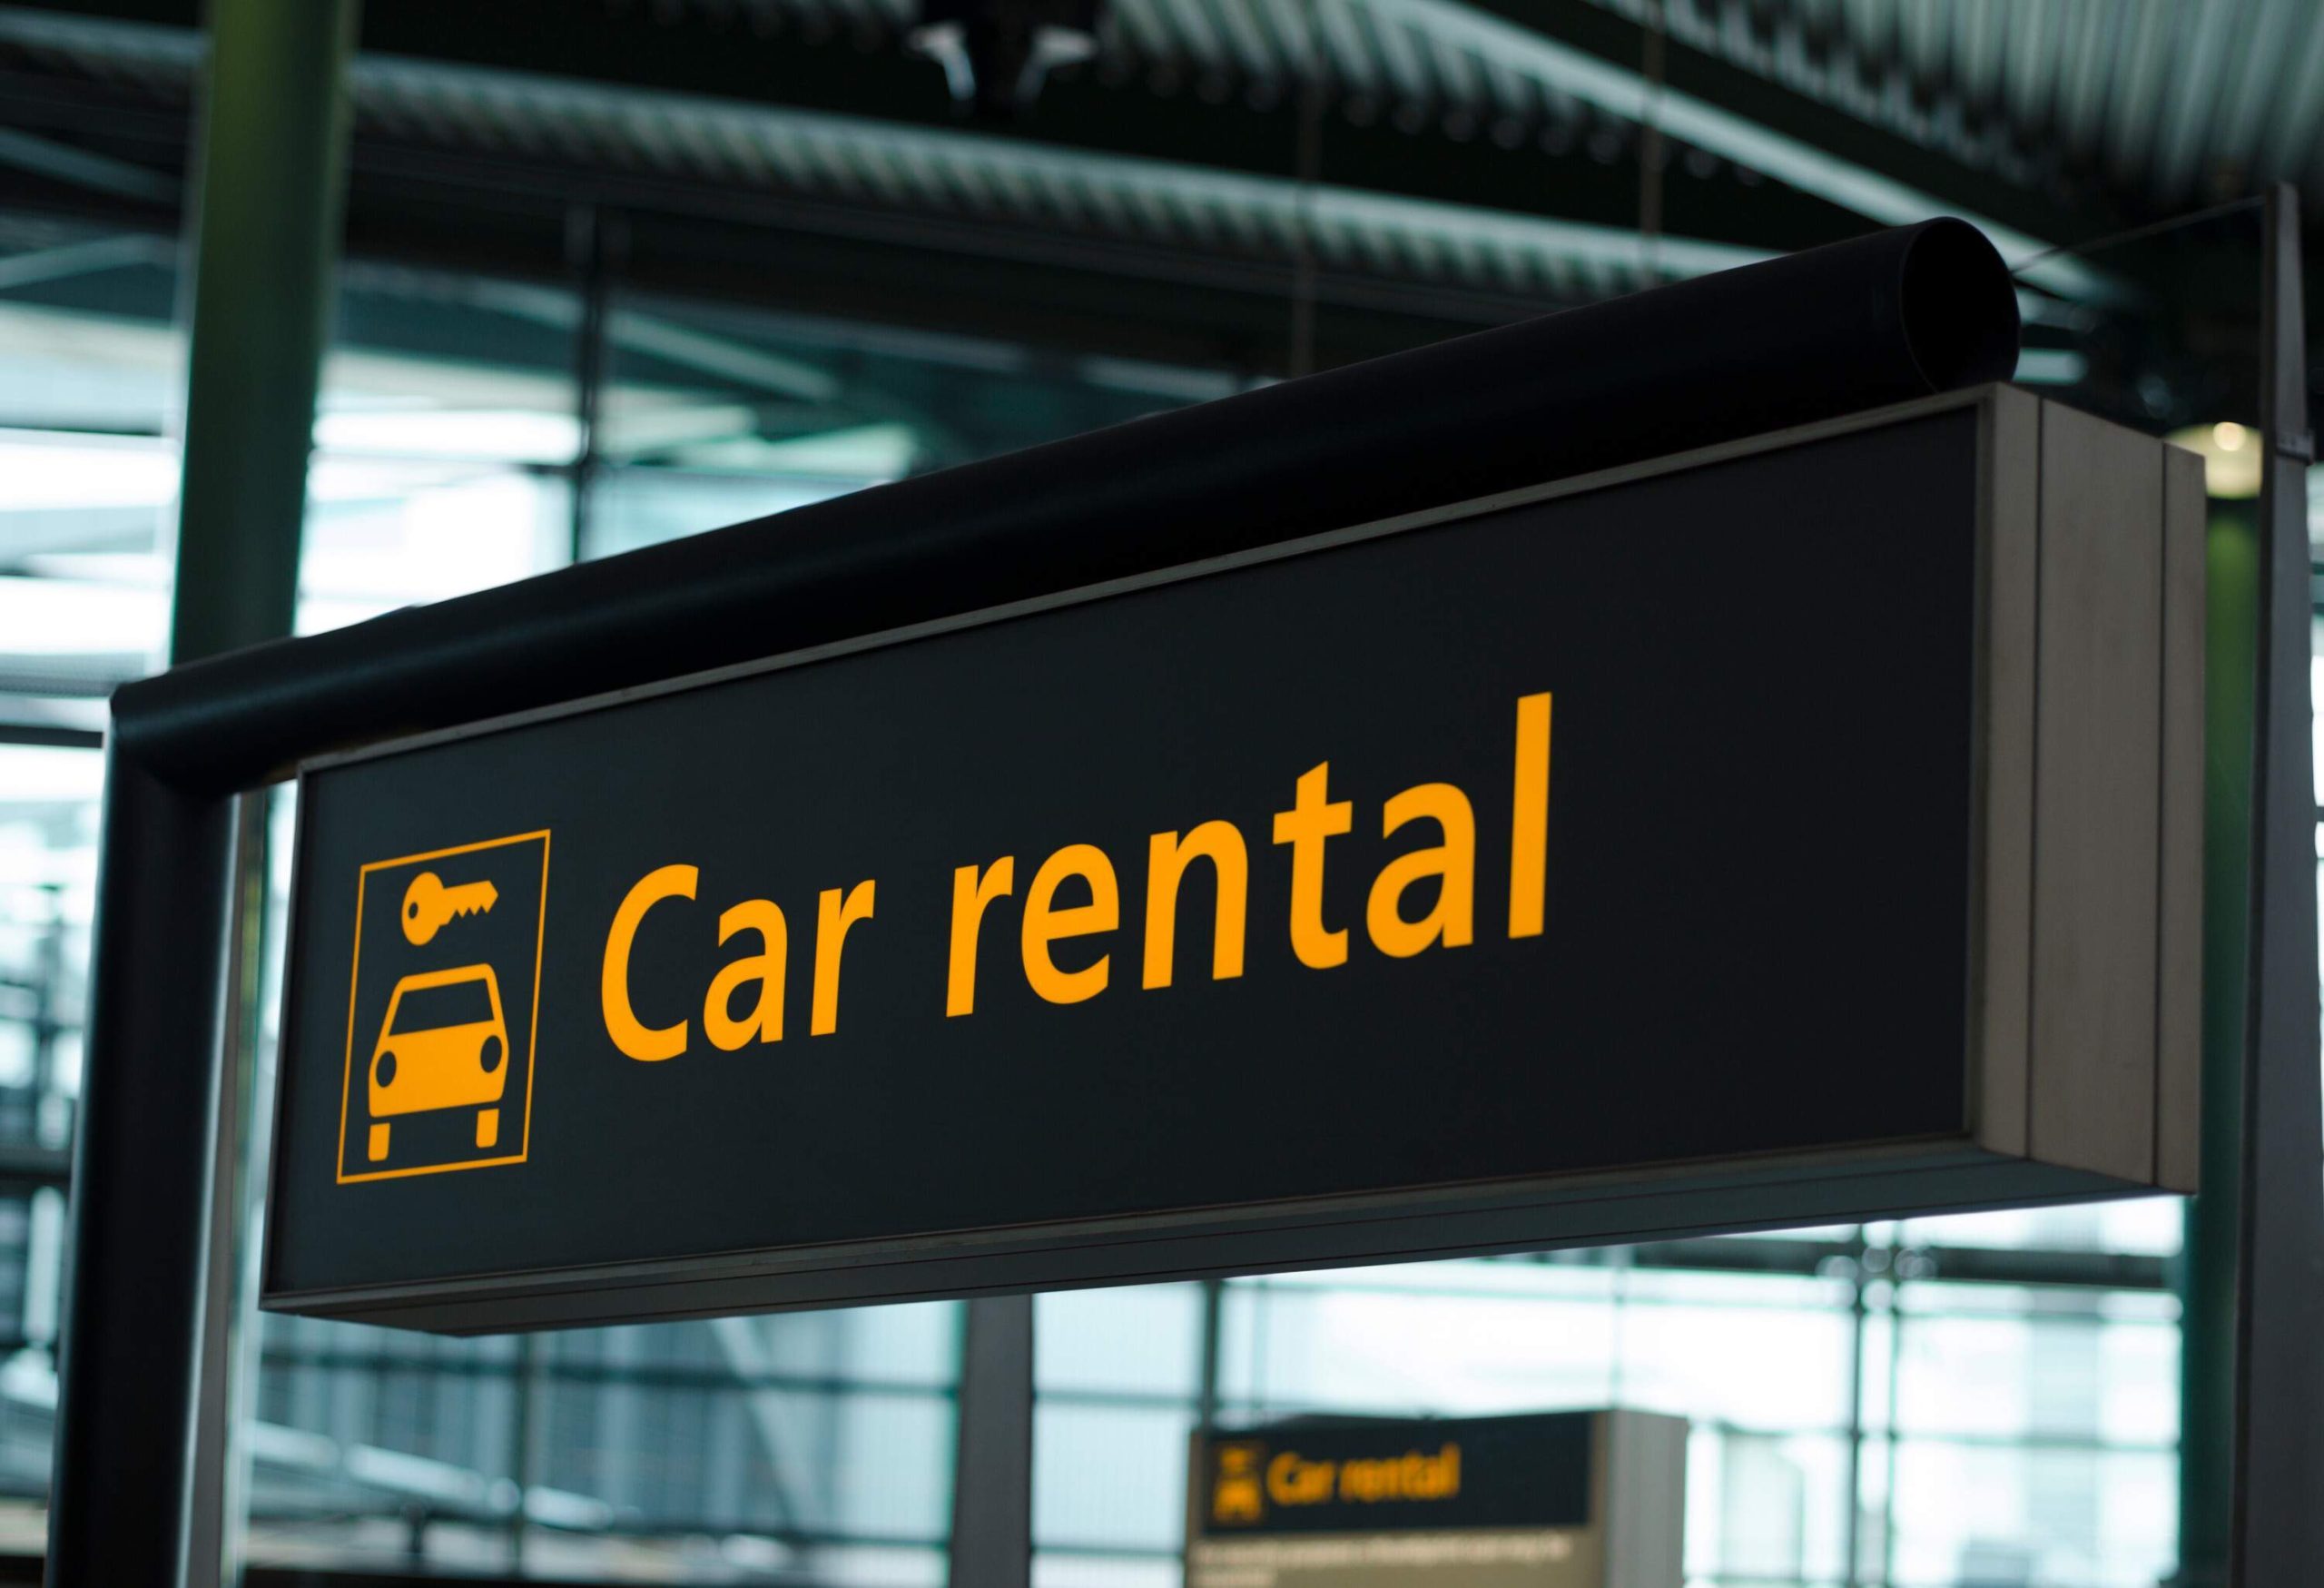 theme_sign_airport_car_rental_gettyimages-467103541-copy